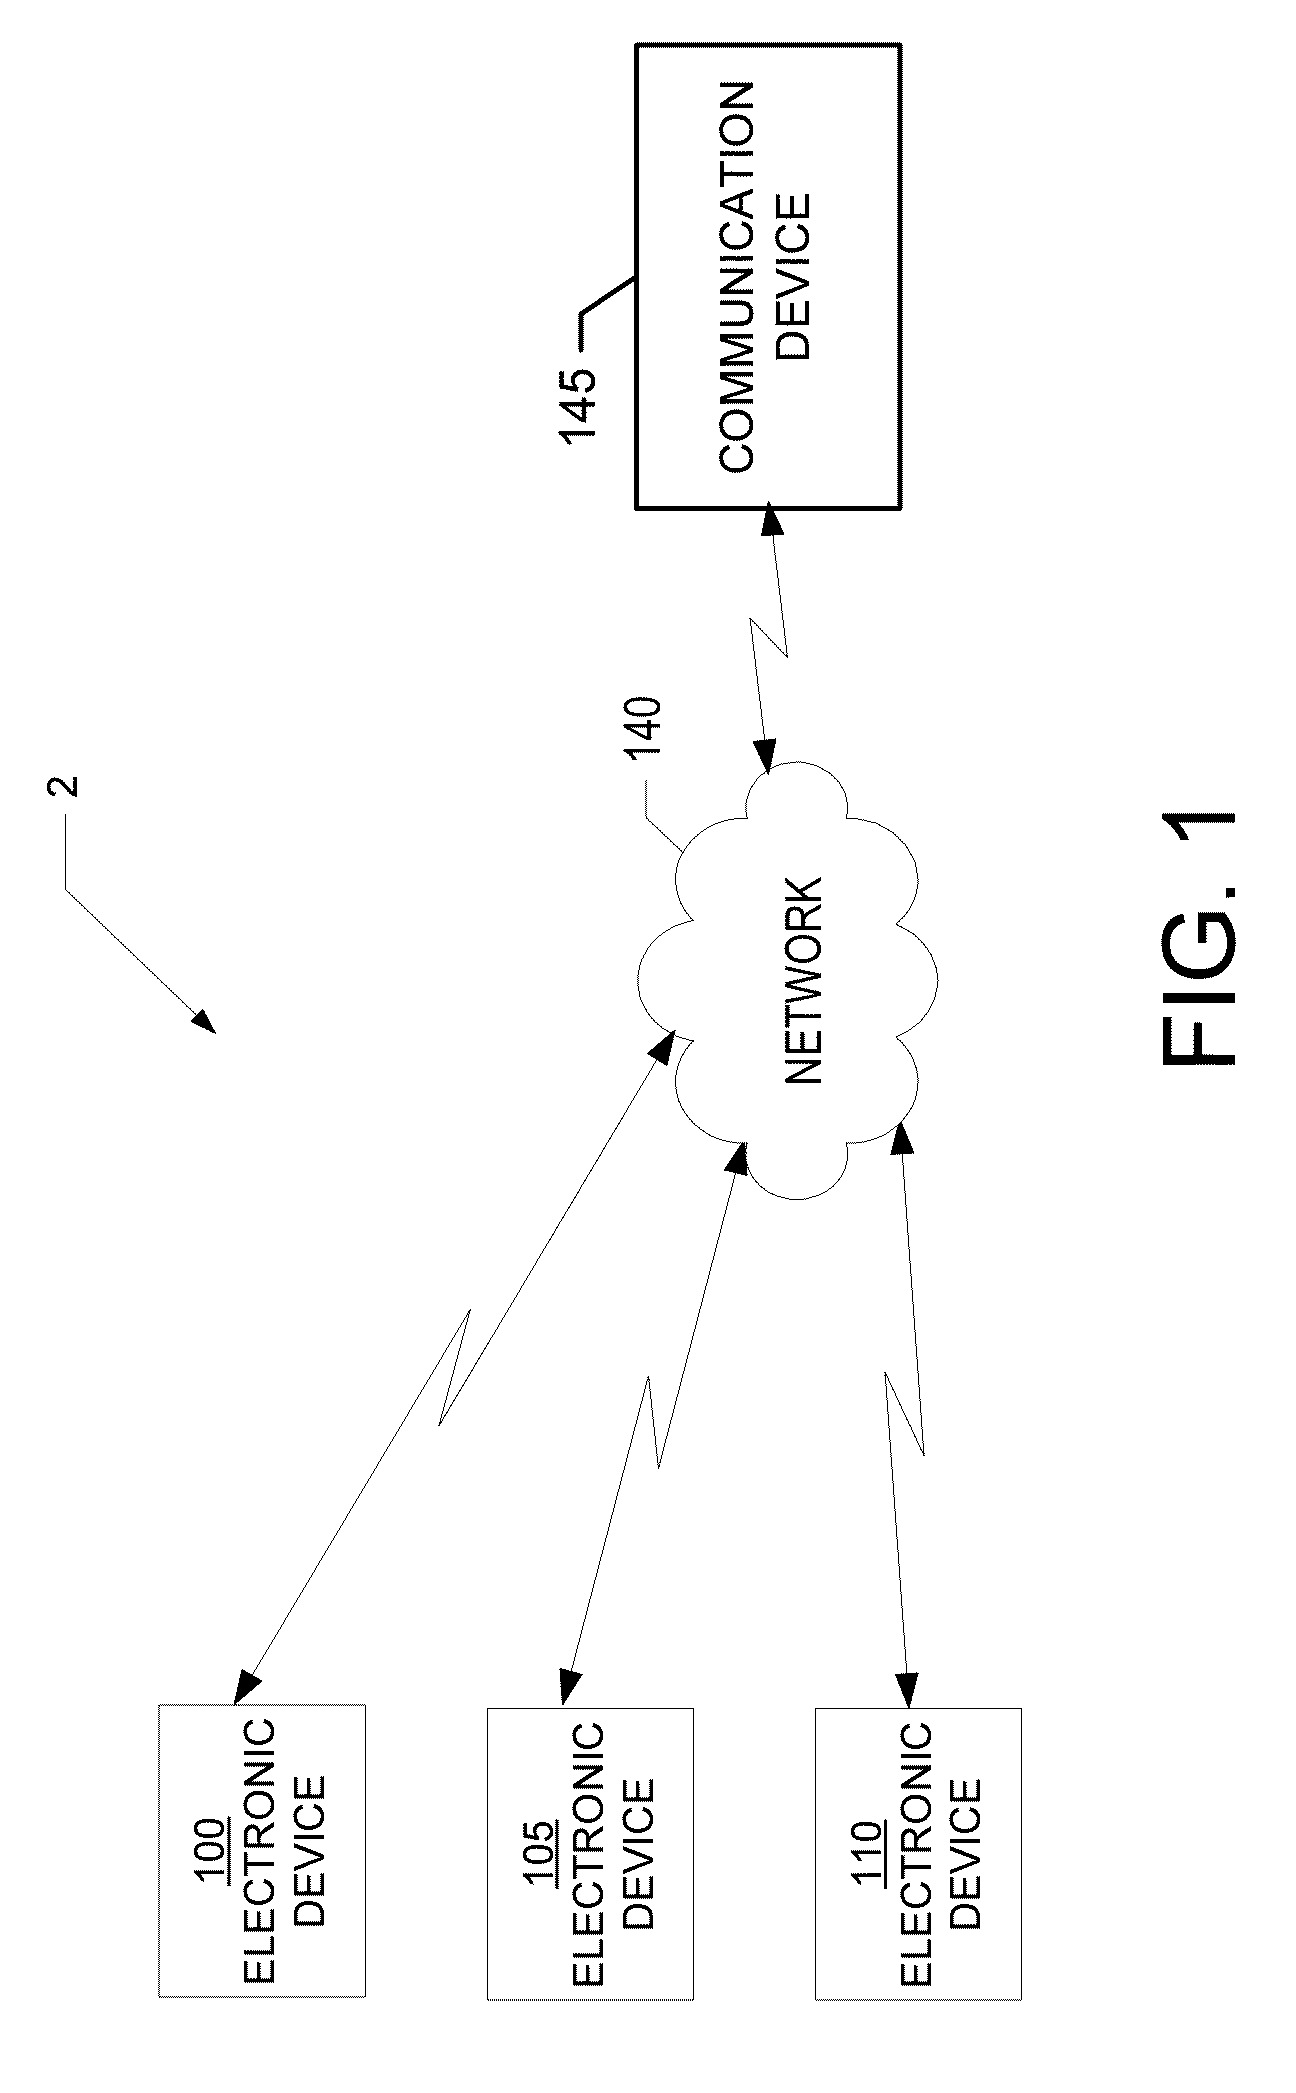 Methods, apparatuses and computer program products for auditing protected health information